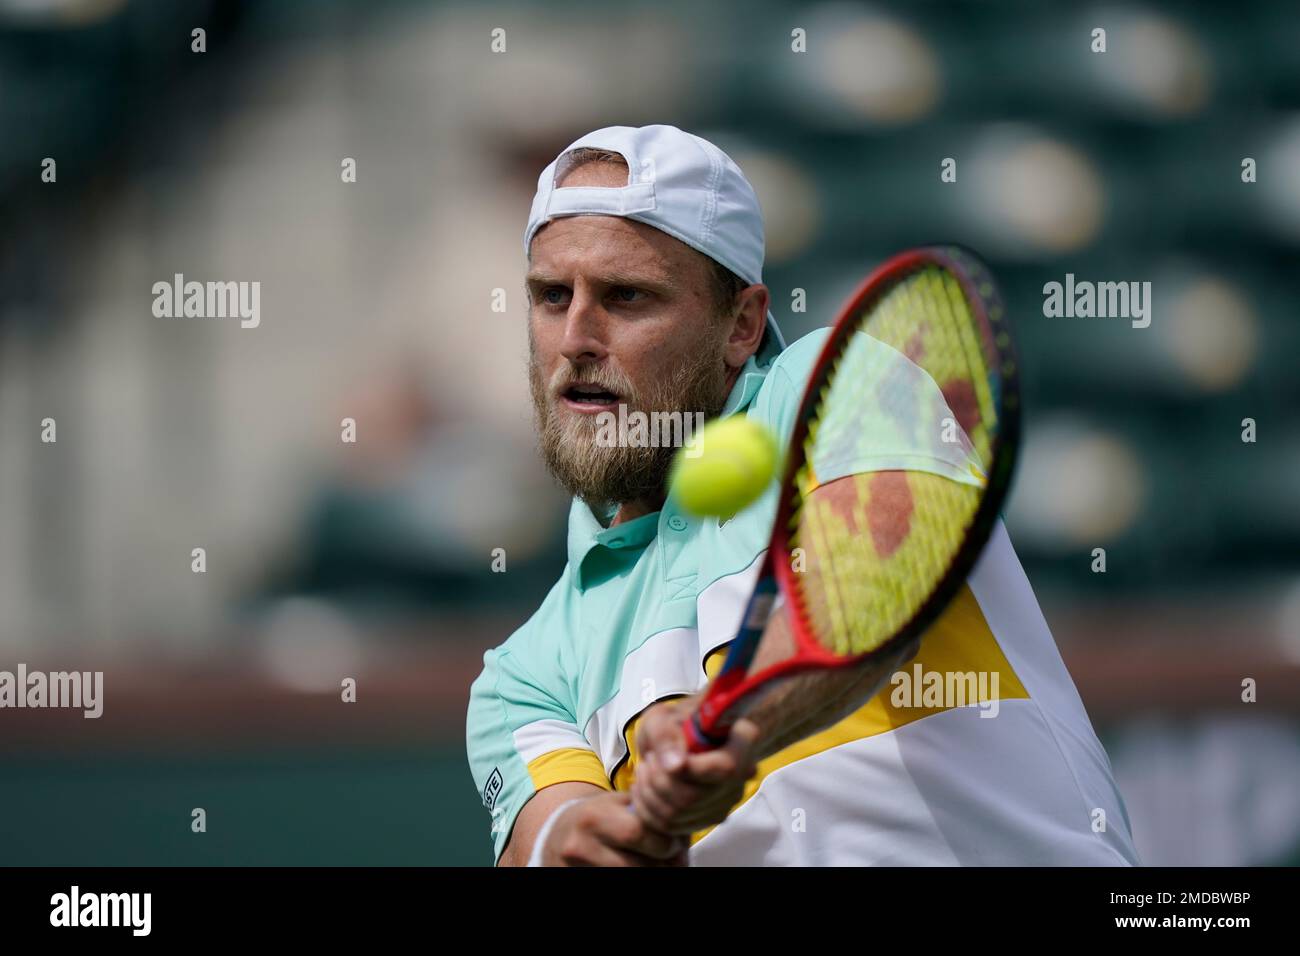 Denis Kudla, of the United States, returns to Alejandro Tabilo, of Chile, at the BNP Paribas Open tennis tournament Friday, Oct. 8, 2021, in Indian Wells, Calif